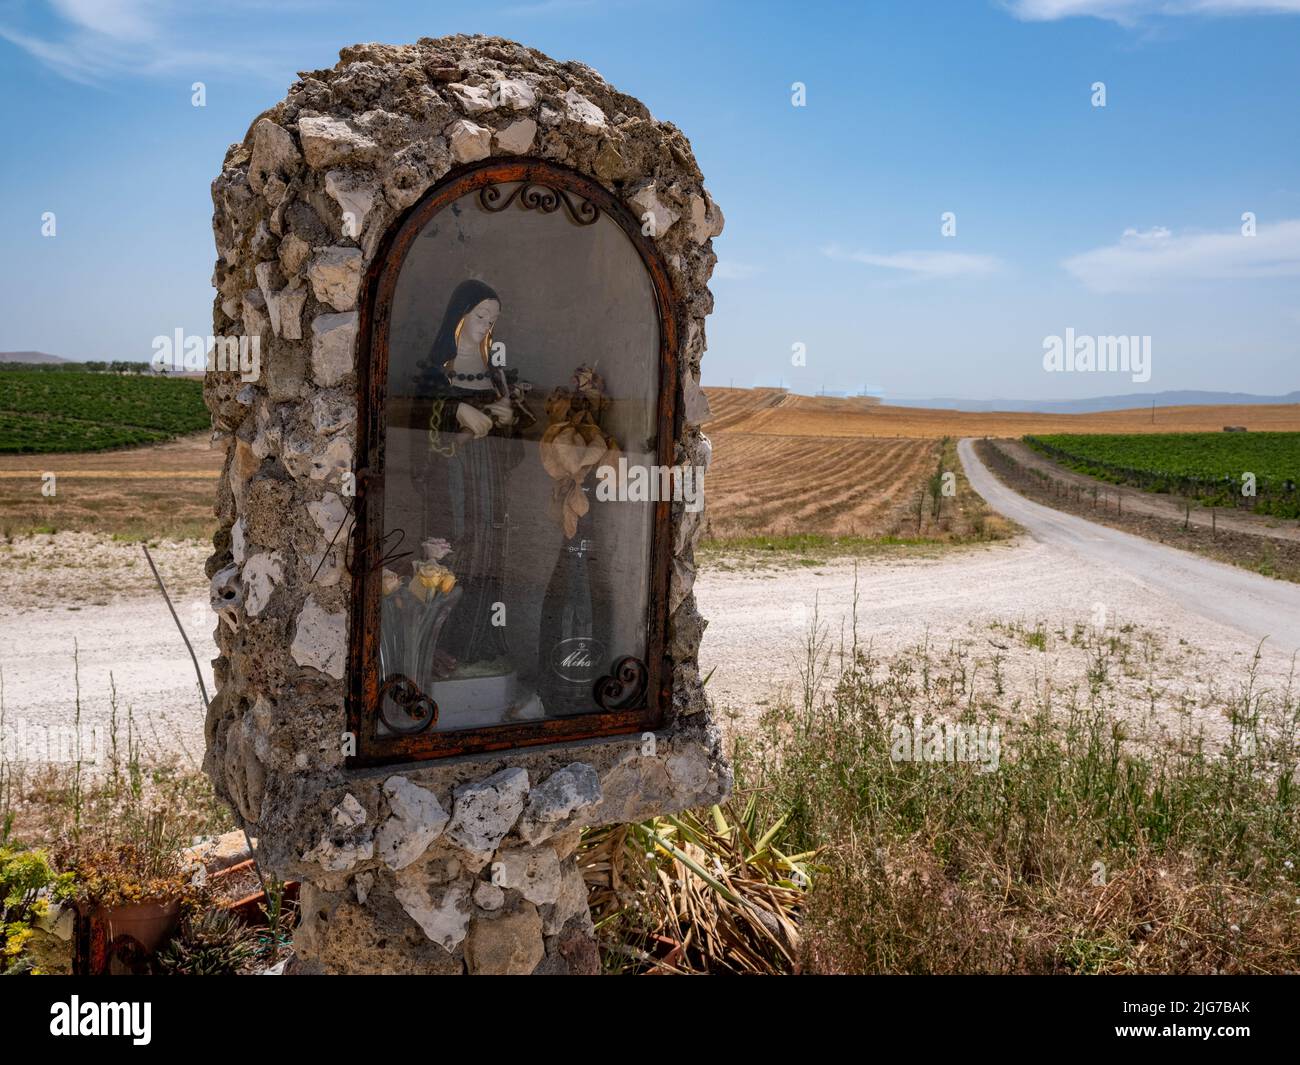 Roadside devotional mini-chapel made of stones and featuring the Virgin Mary or a Saint behind a glass door near Matera, Italy Stock Photo